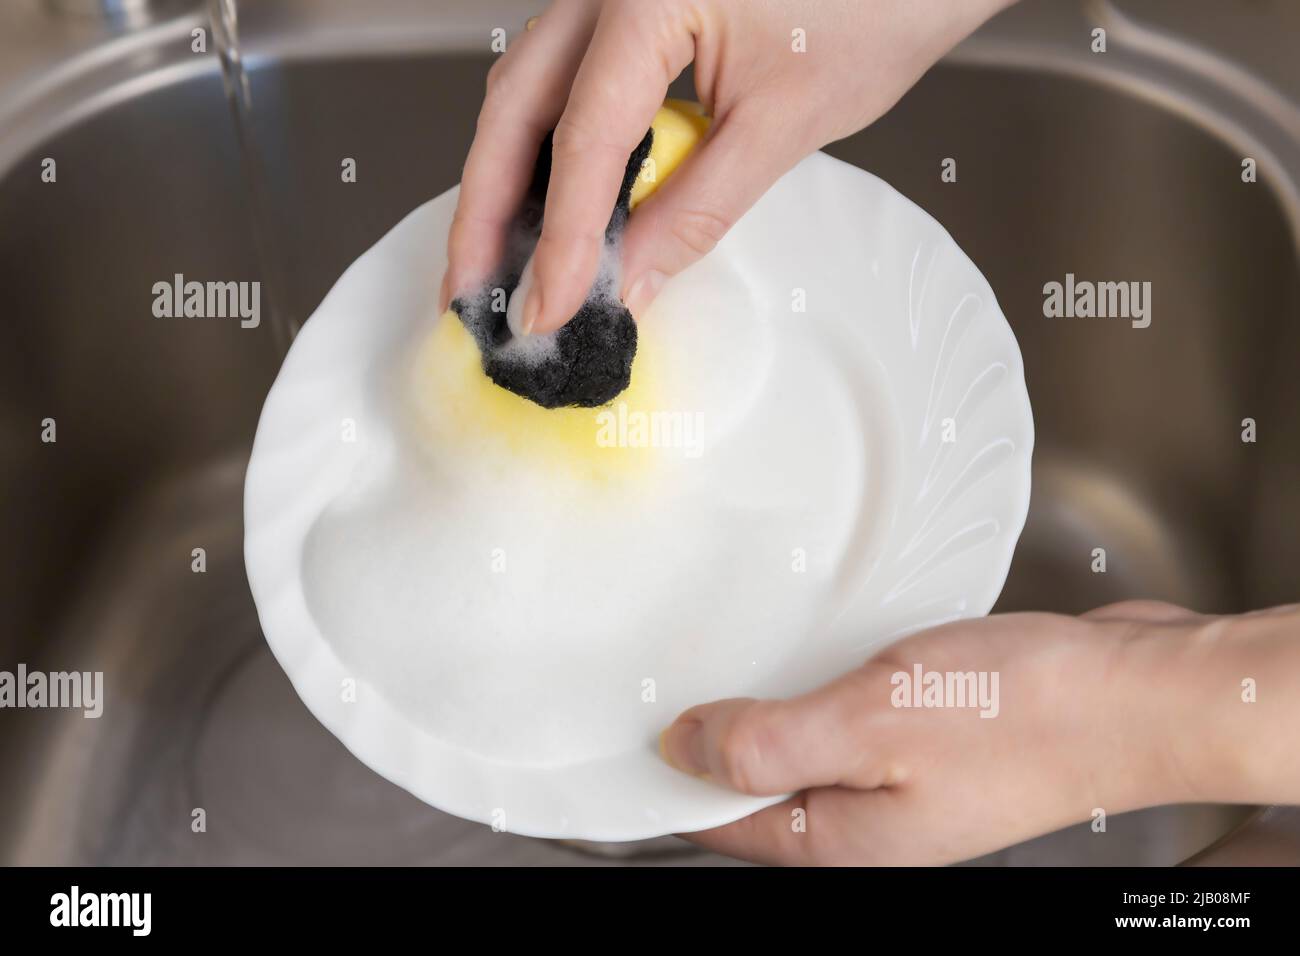 Woman washes a plate in the kitchen under the sink. Top view close up. Stock Photo